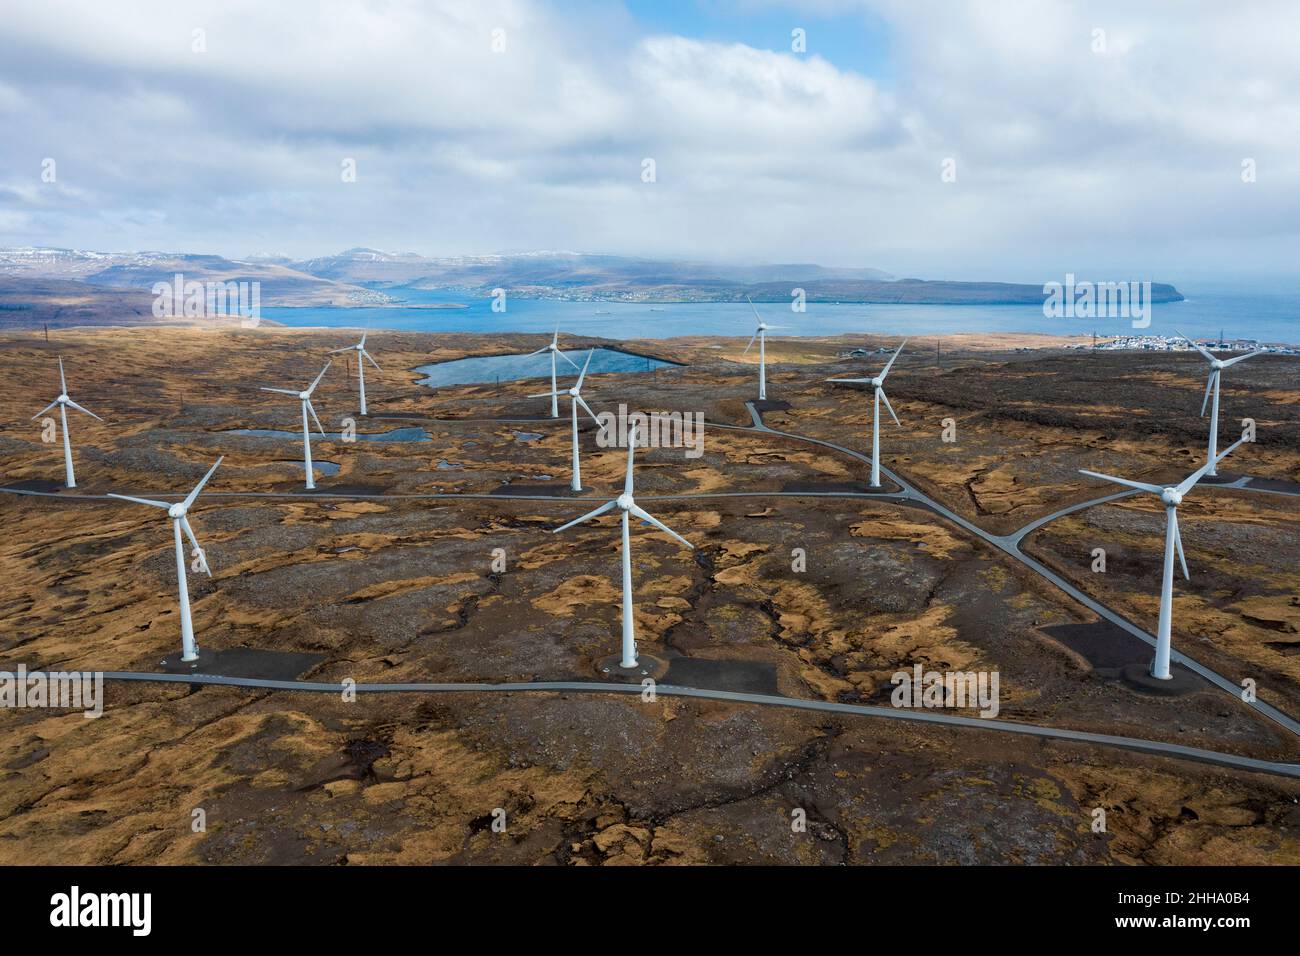 The wind turbines are not a blot on this rugged, mustard coloured landscape as they harness the fierce Faroe Island winds. Stock Photo